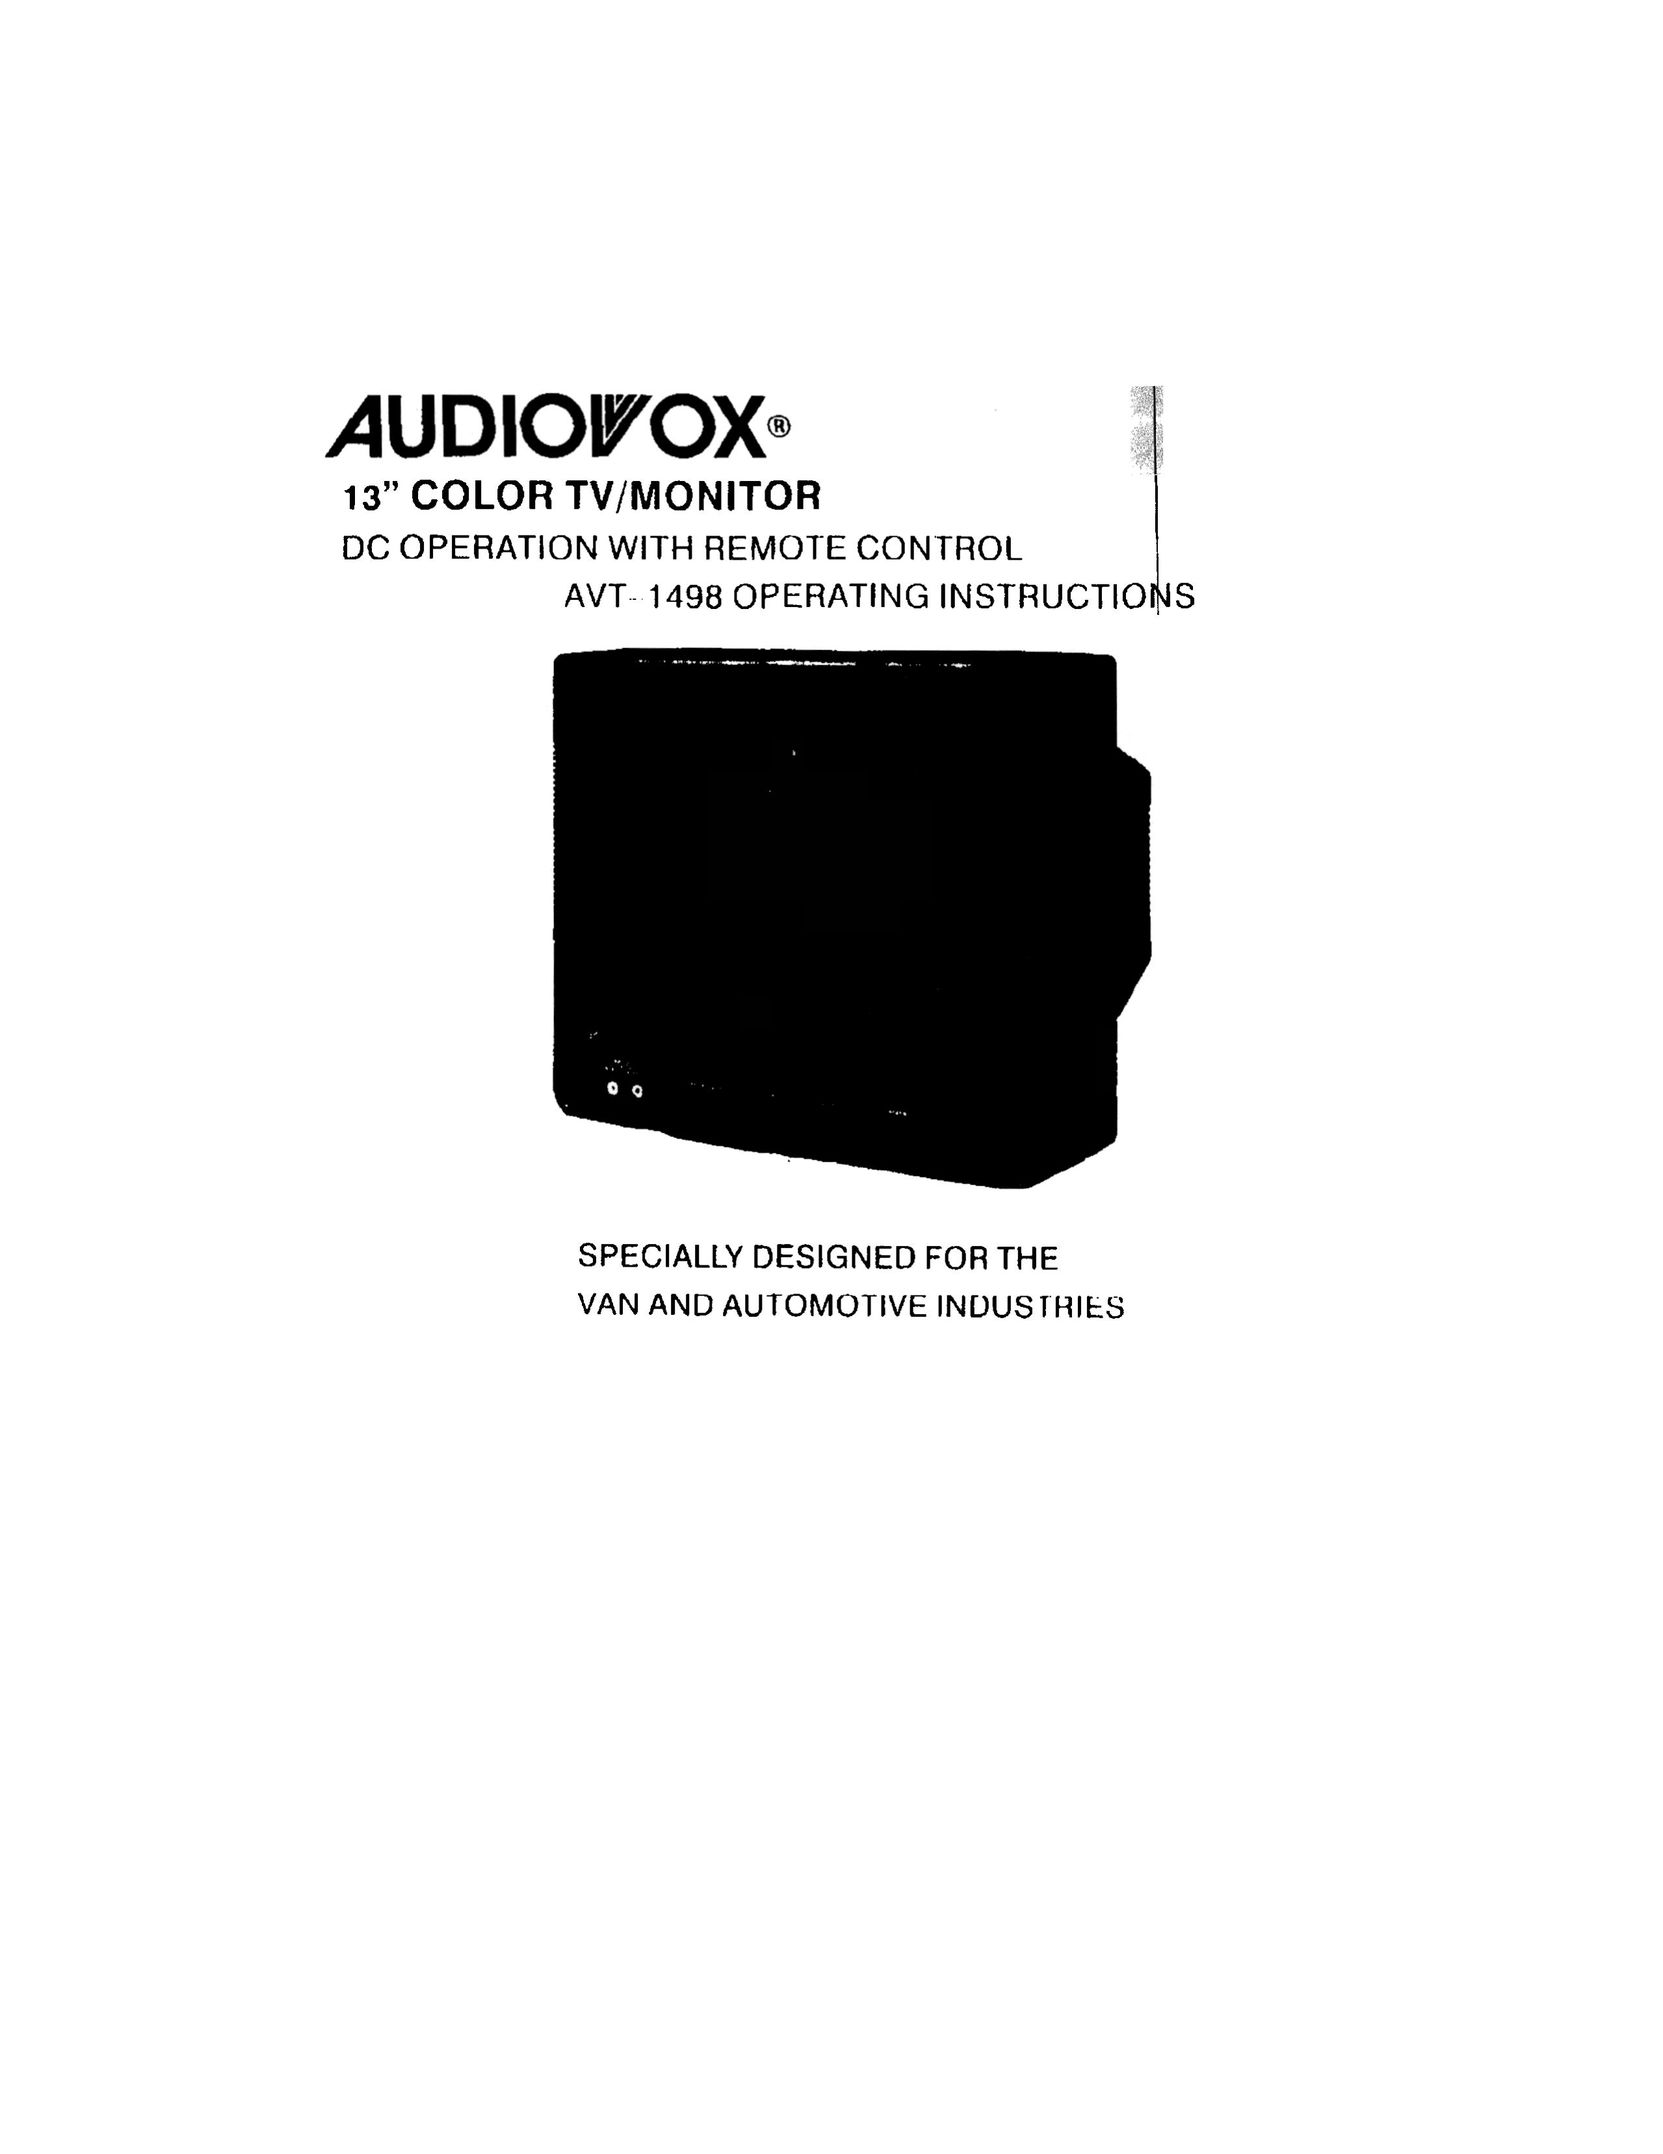 Audiovox AVT 1498 CRT Television User Manual (Page 1)